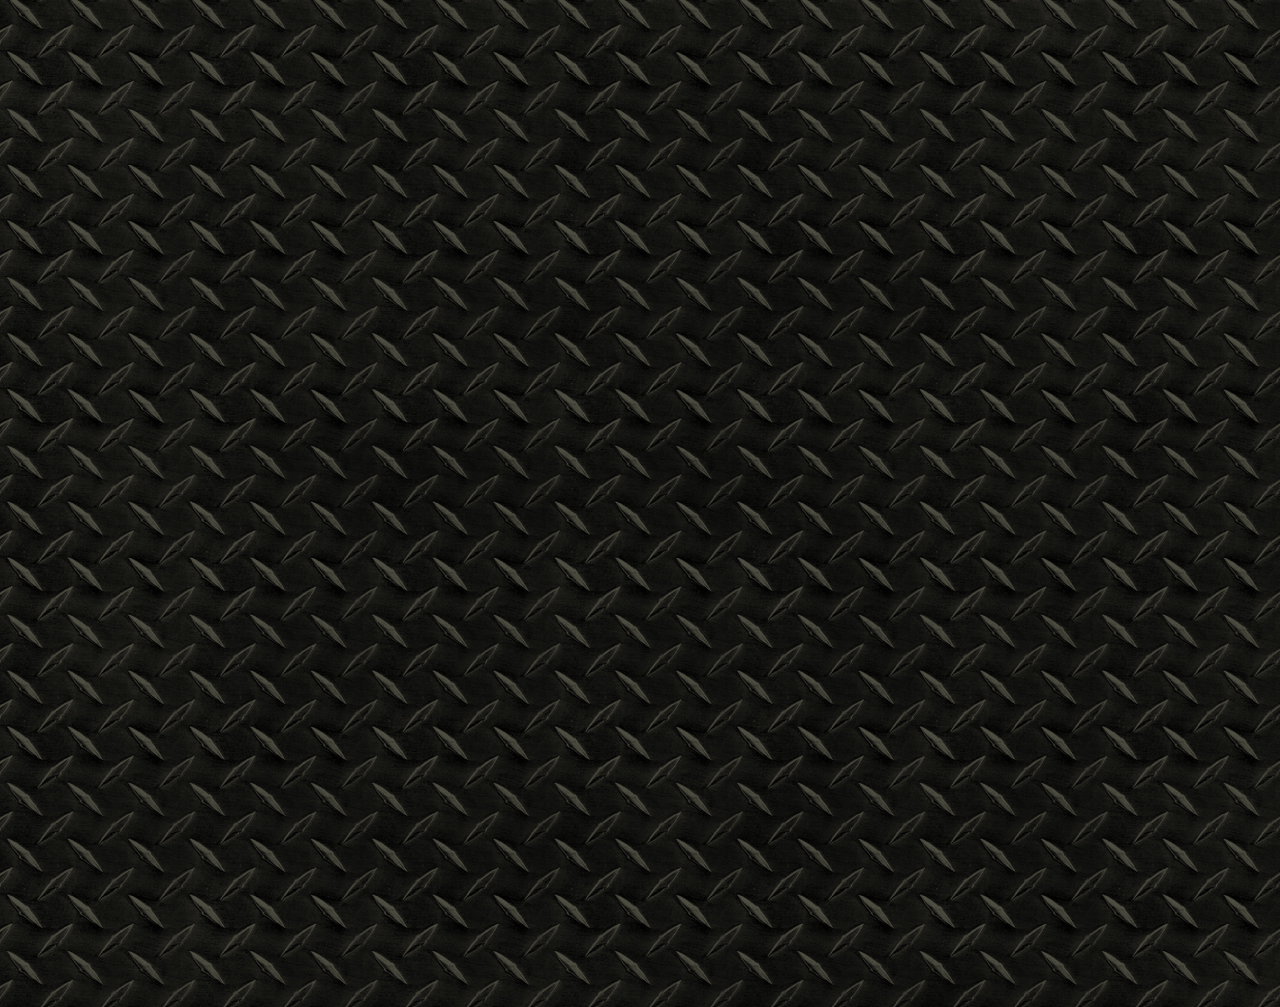 Black Diamond Plate Wallpaper Layouts Background Created By